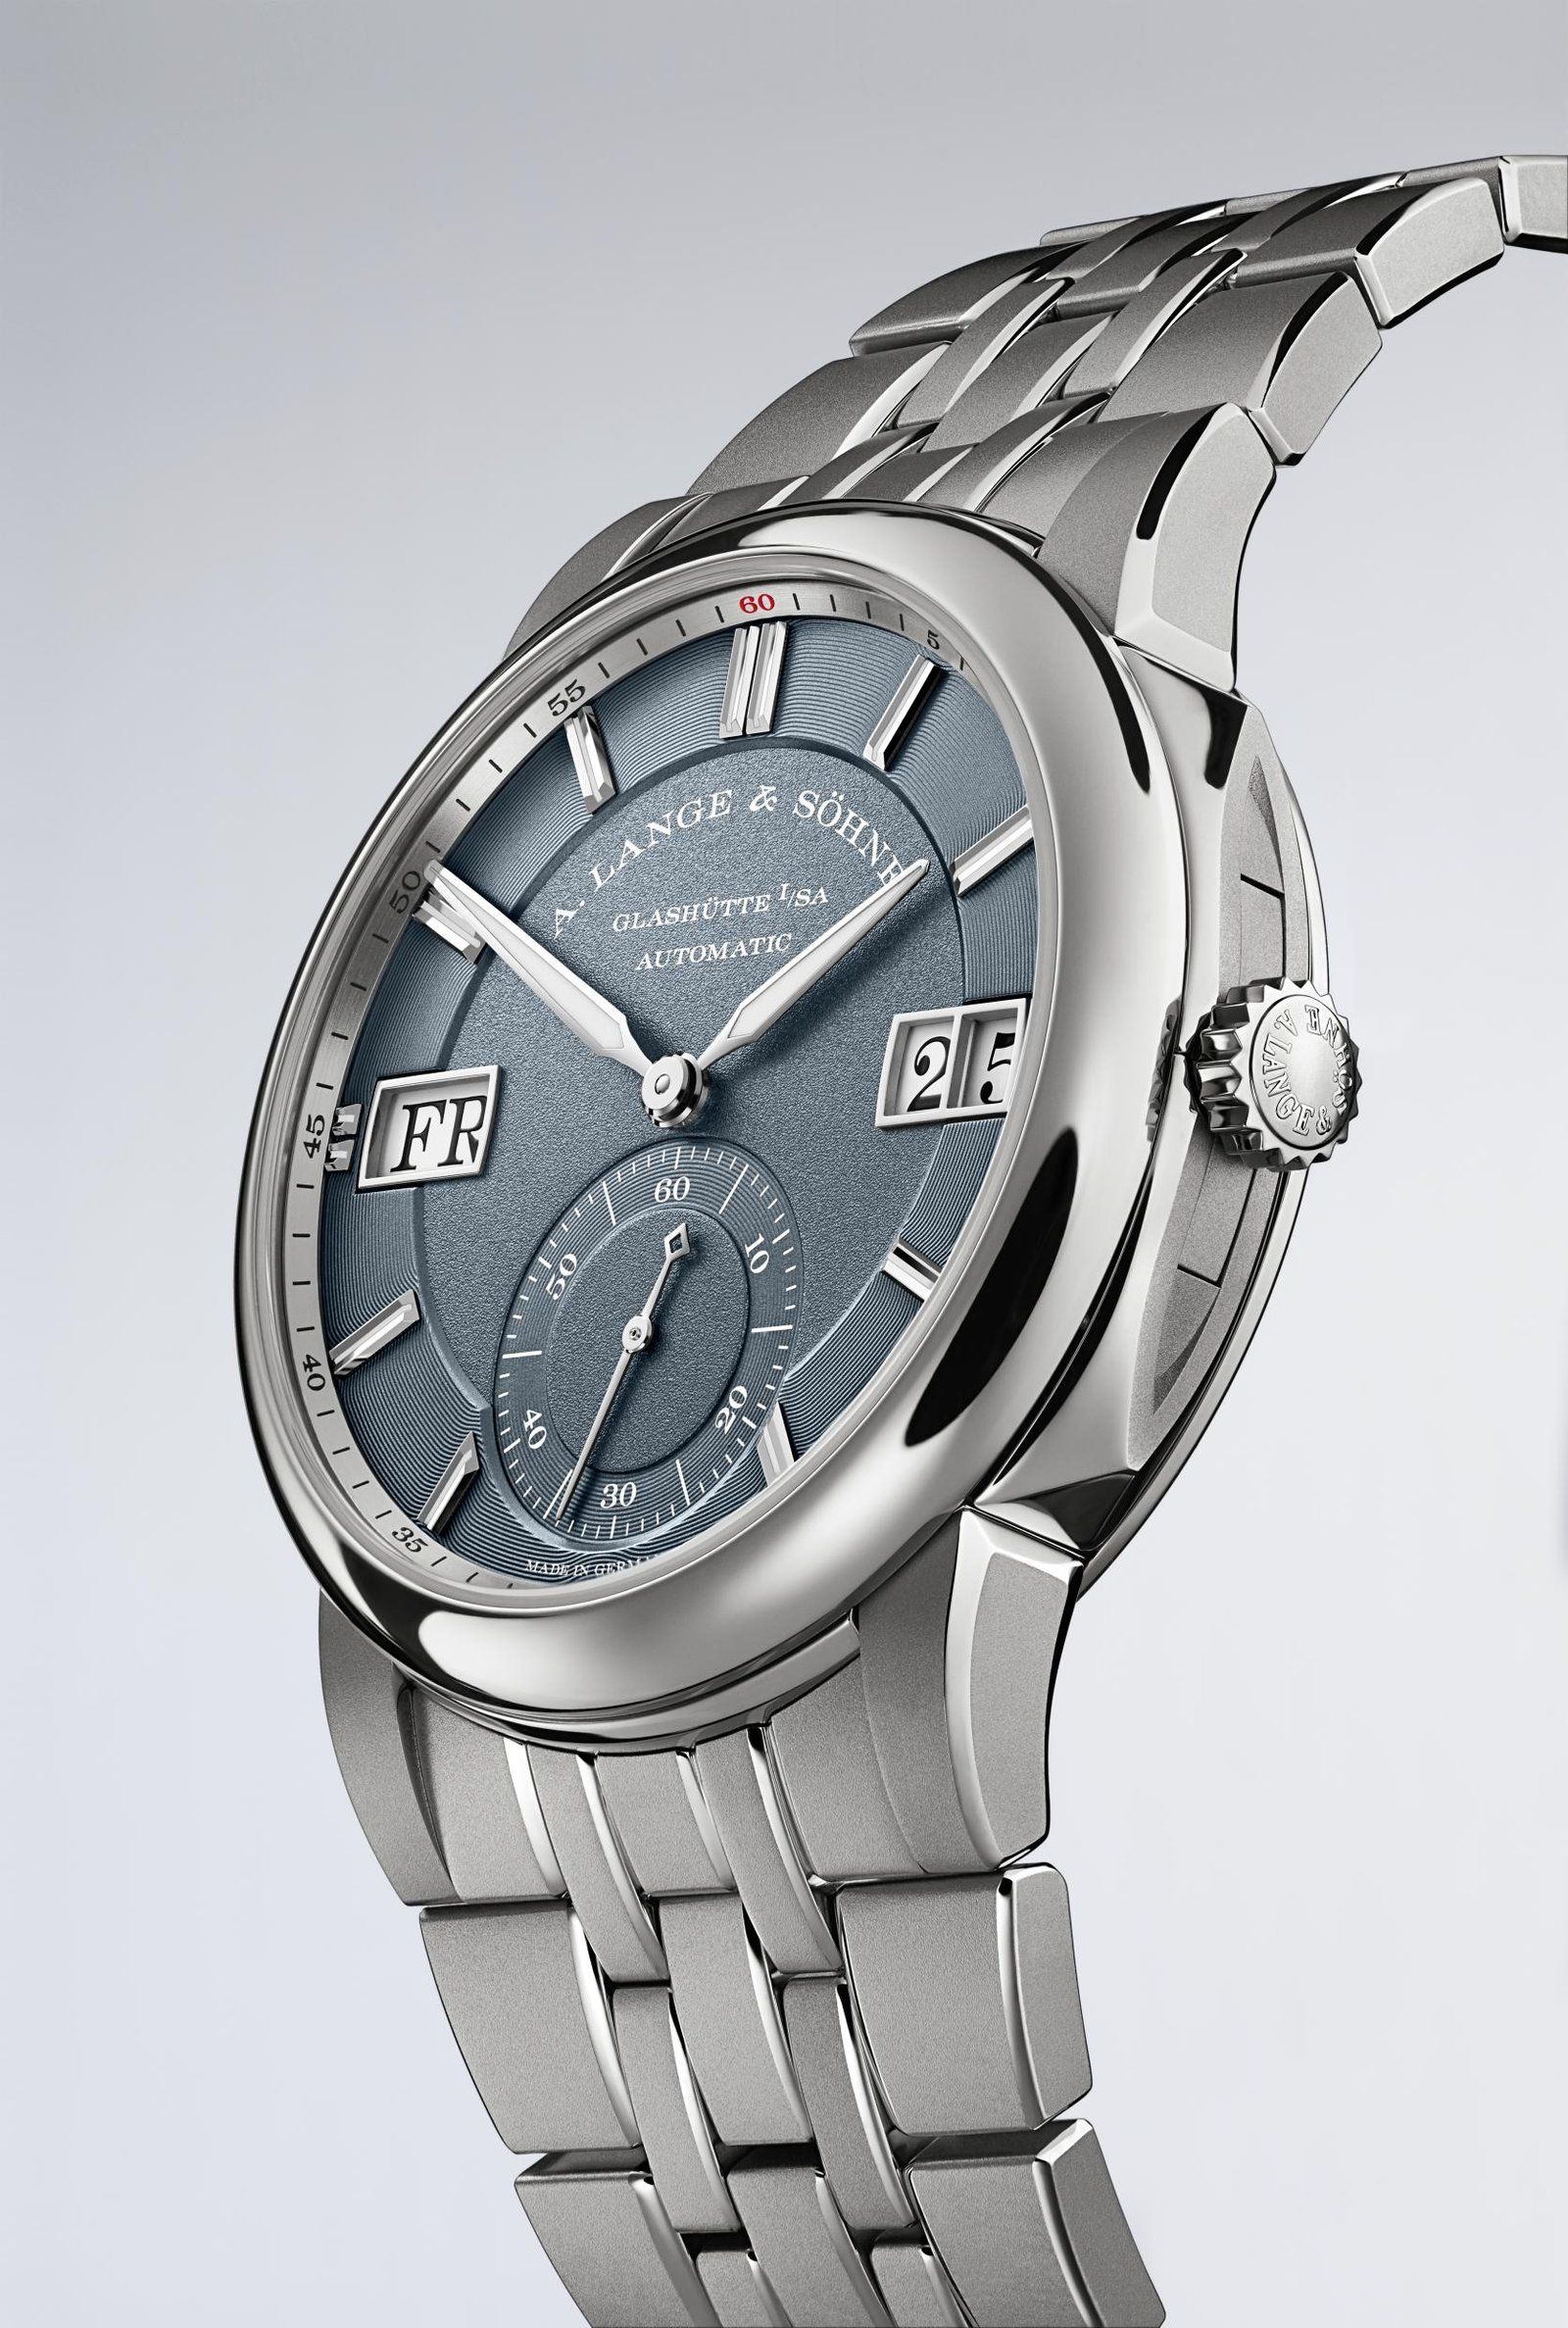 Odysseus by A. Lange & Sohne in a robust titanium case and bracelet